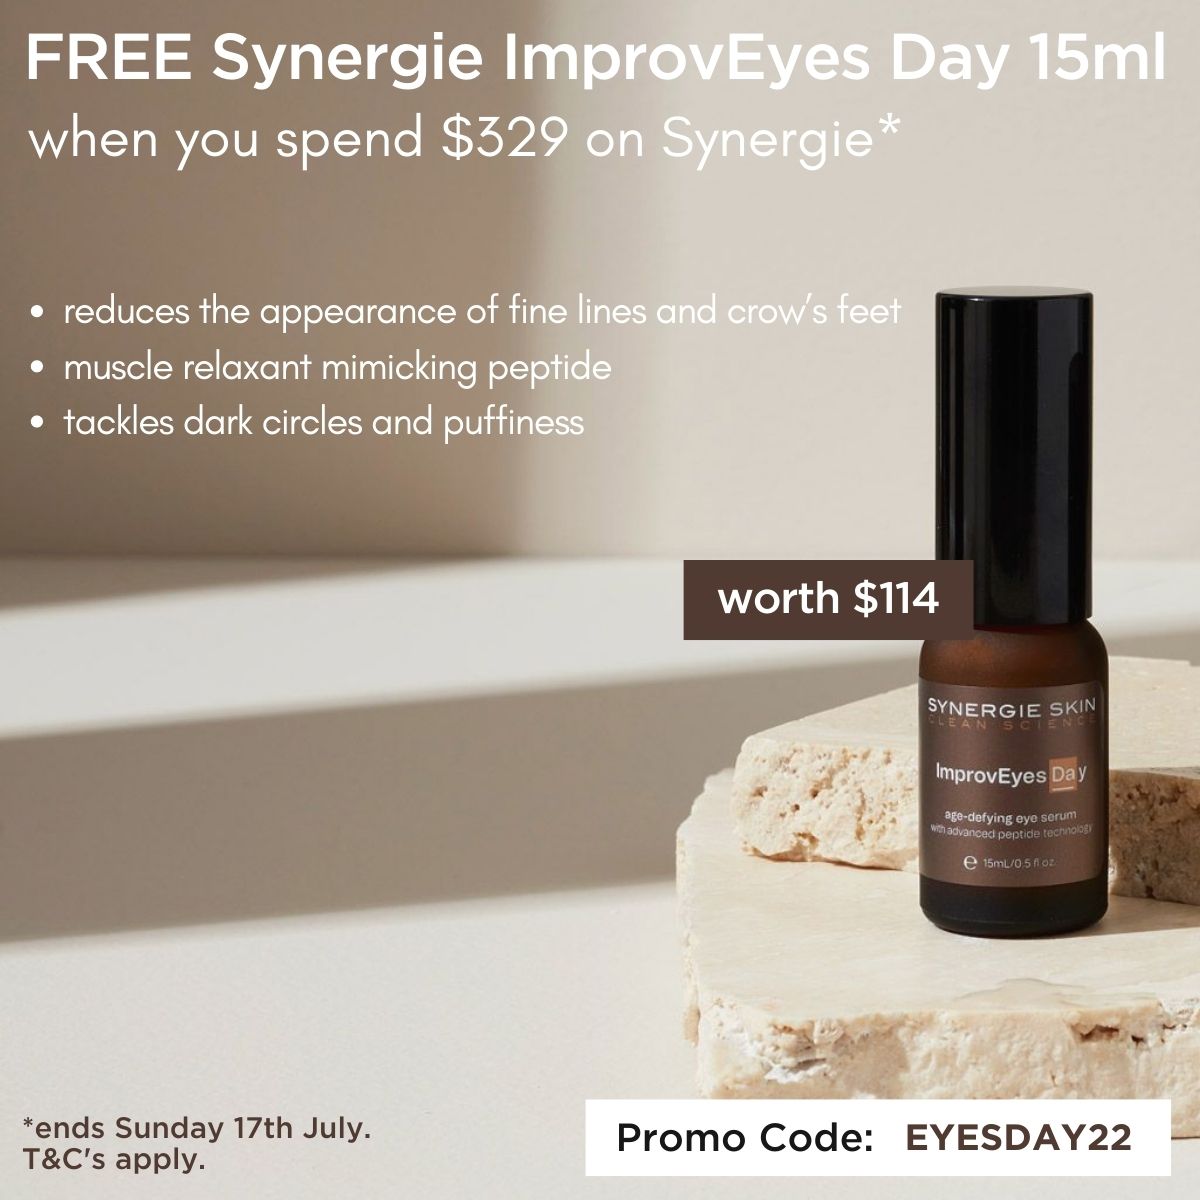 Free Synergie ImprovEyes Day 15ml Offer. Login to purchase if enabled for Synergie or Email/Phone to Enquire.